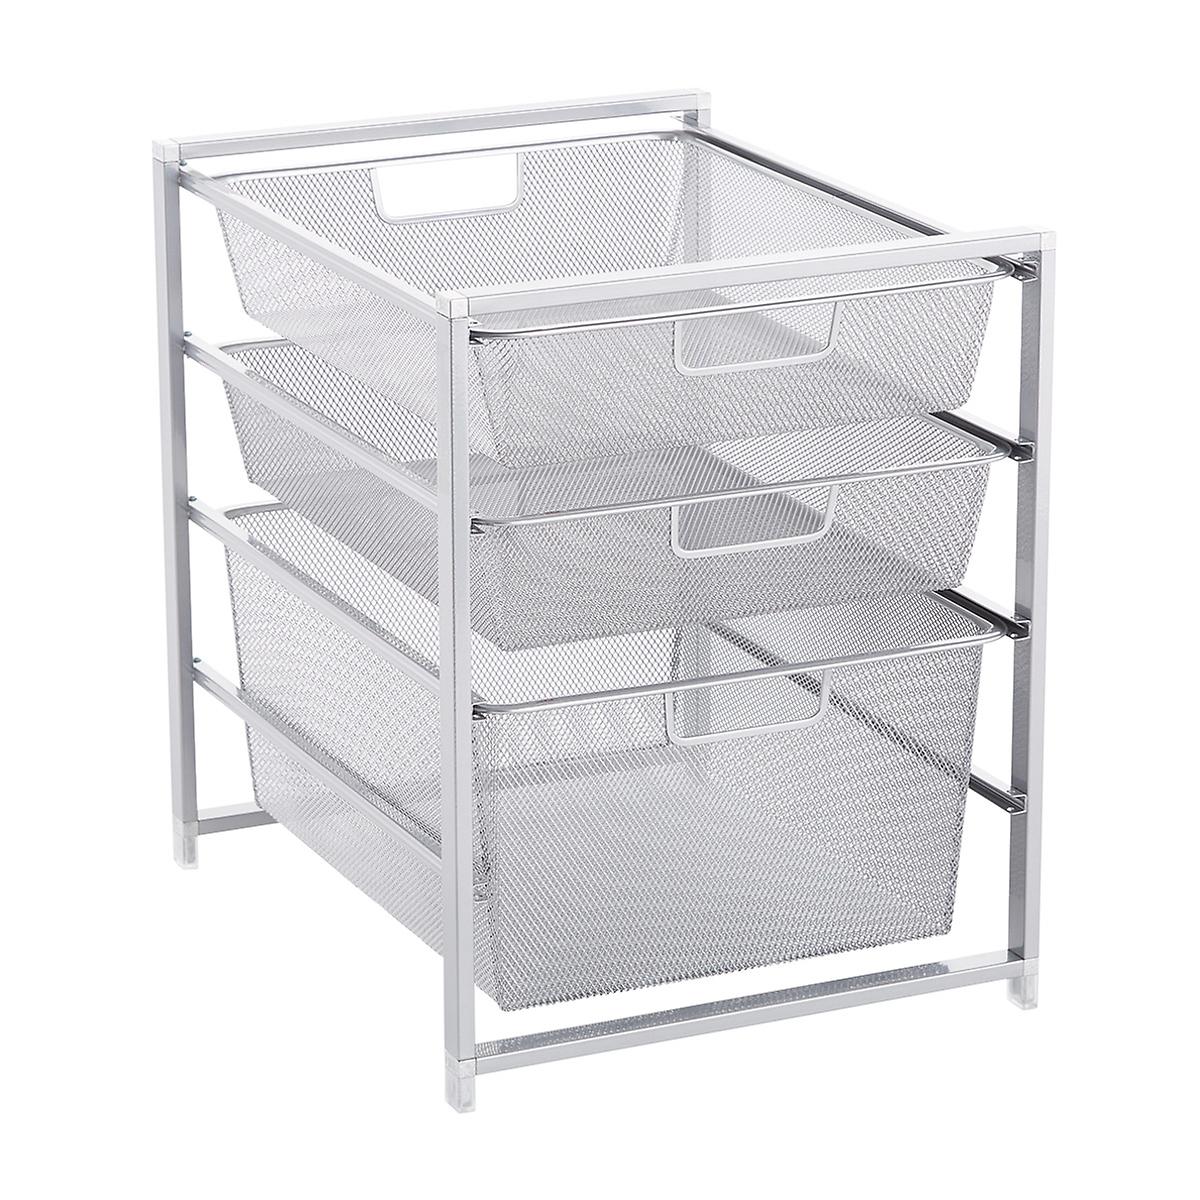 Platinum Cabinet Sized Elfa Mesh Drawer Solution The Container Store